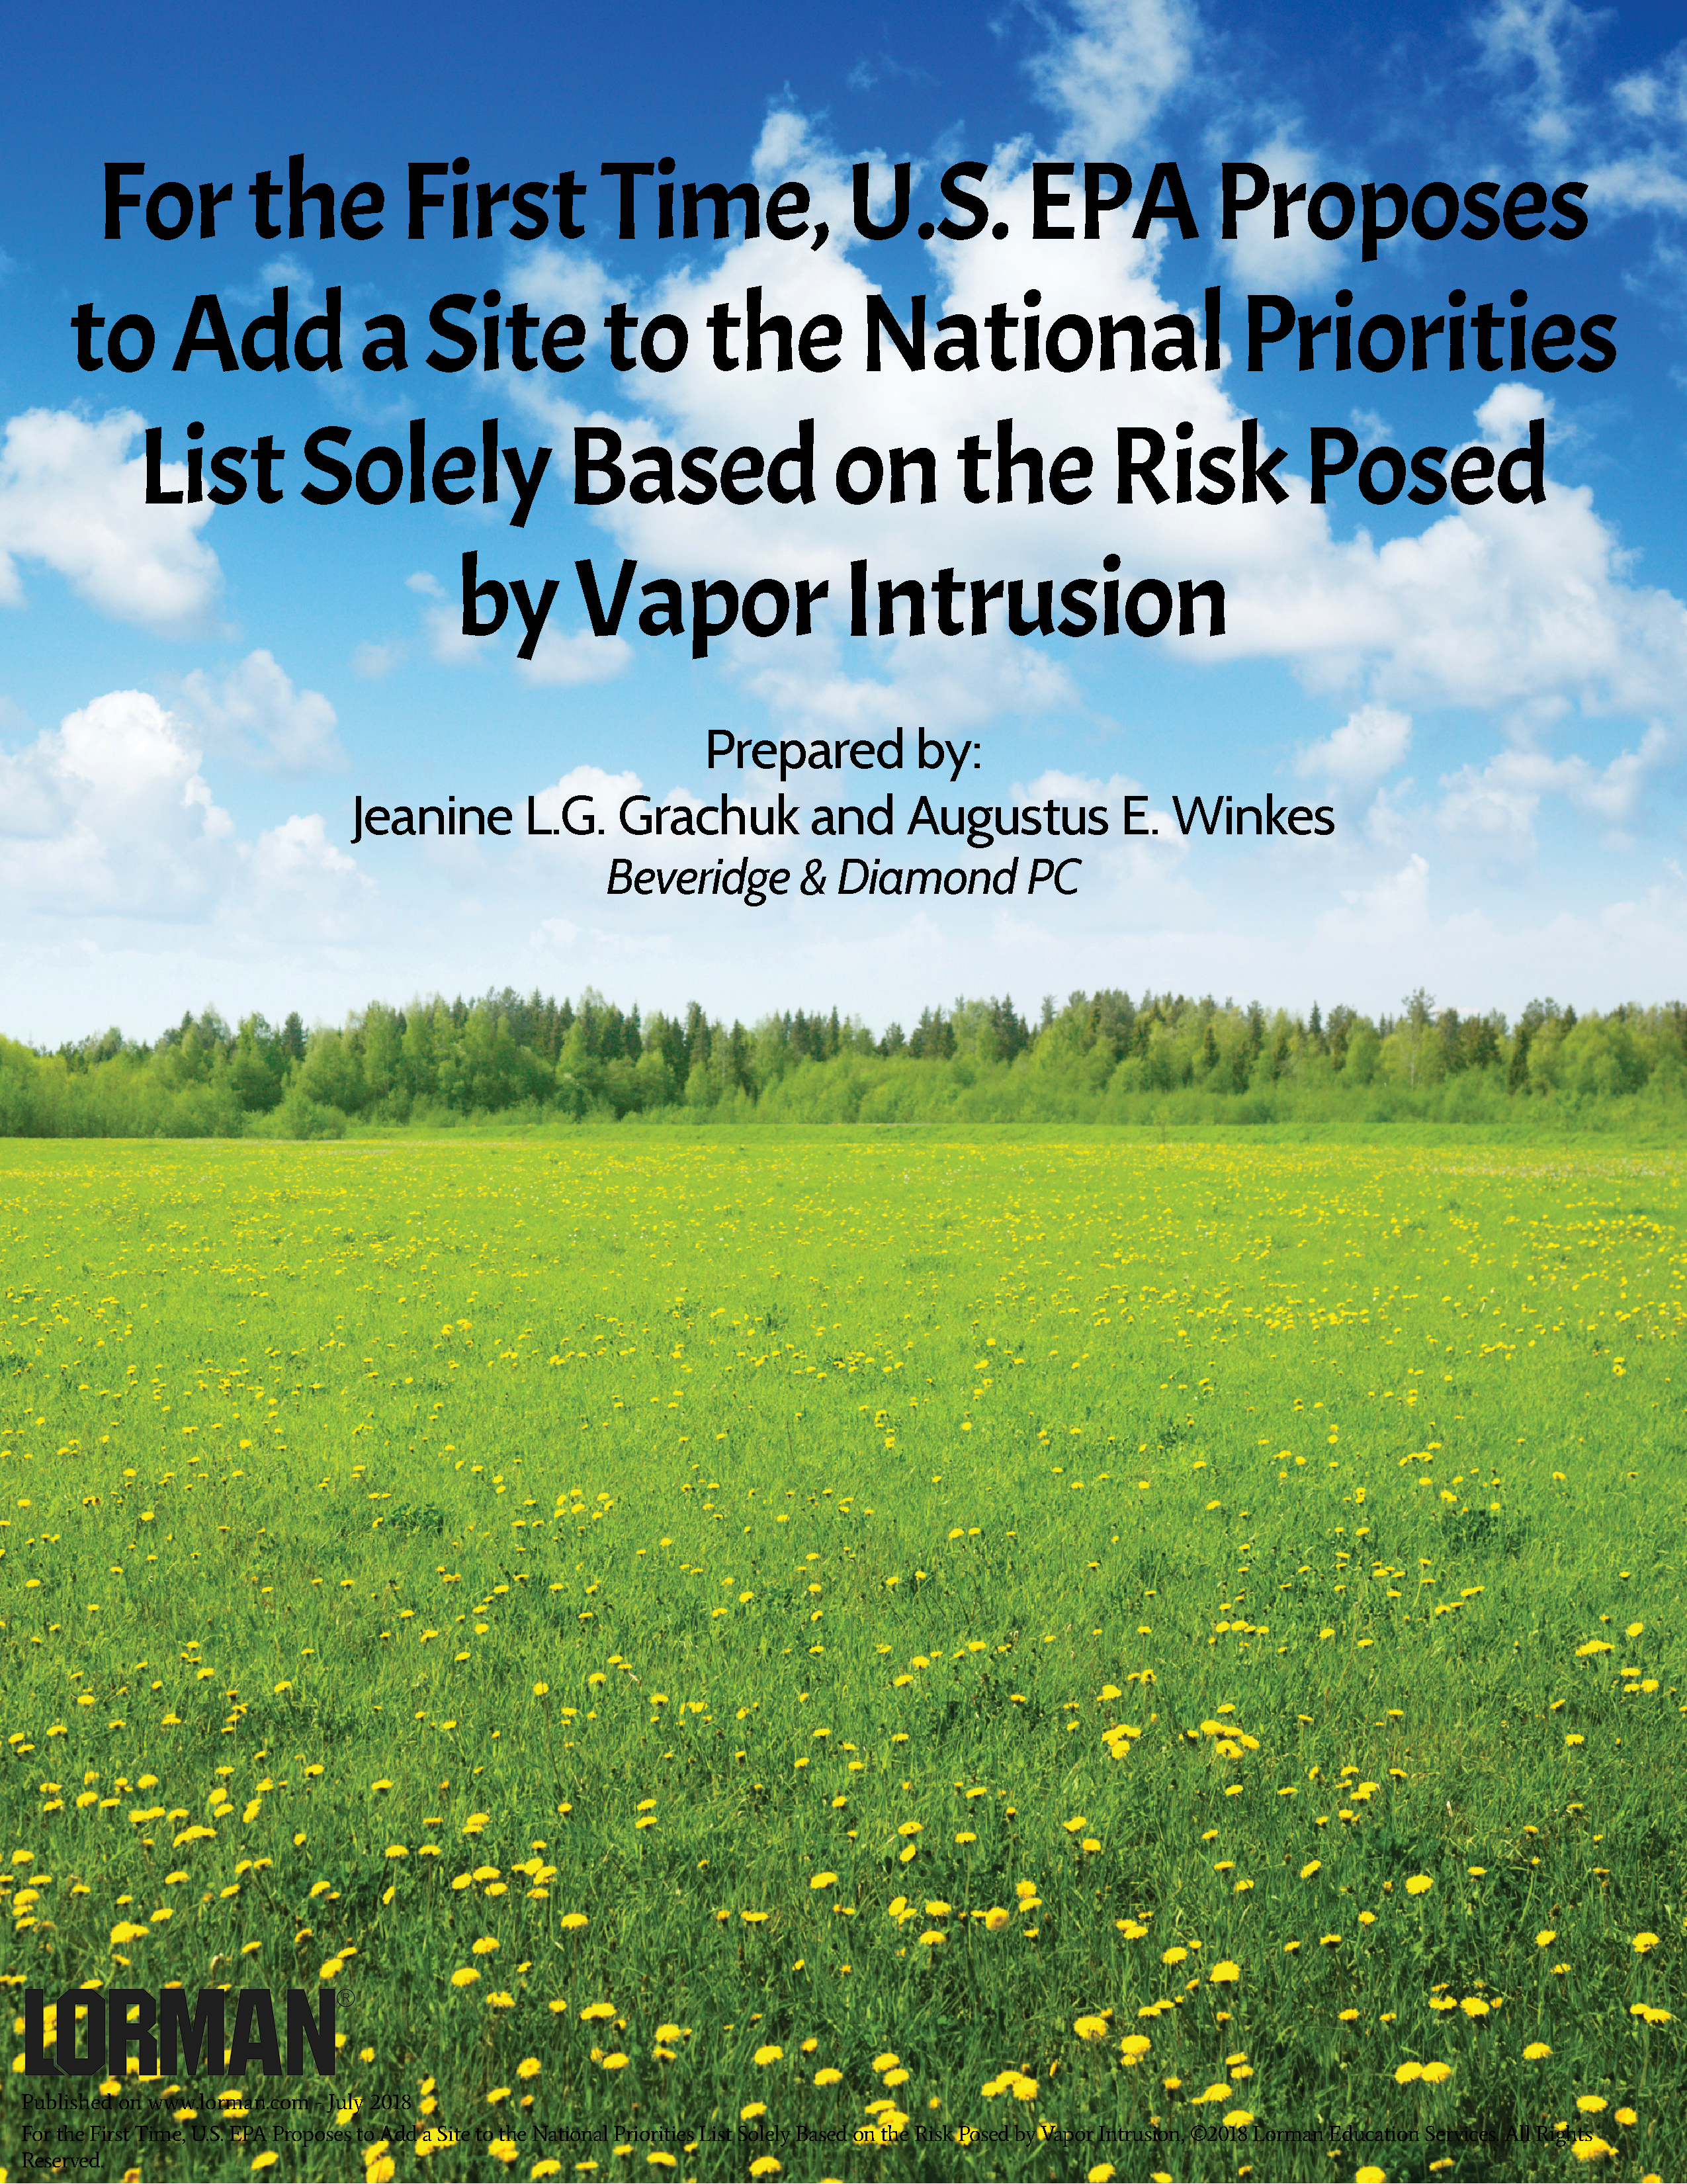 EPA Proposes to Add a Site to the National Priorities List Based on Risk Posed by Vapor Intrusion